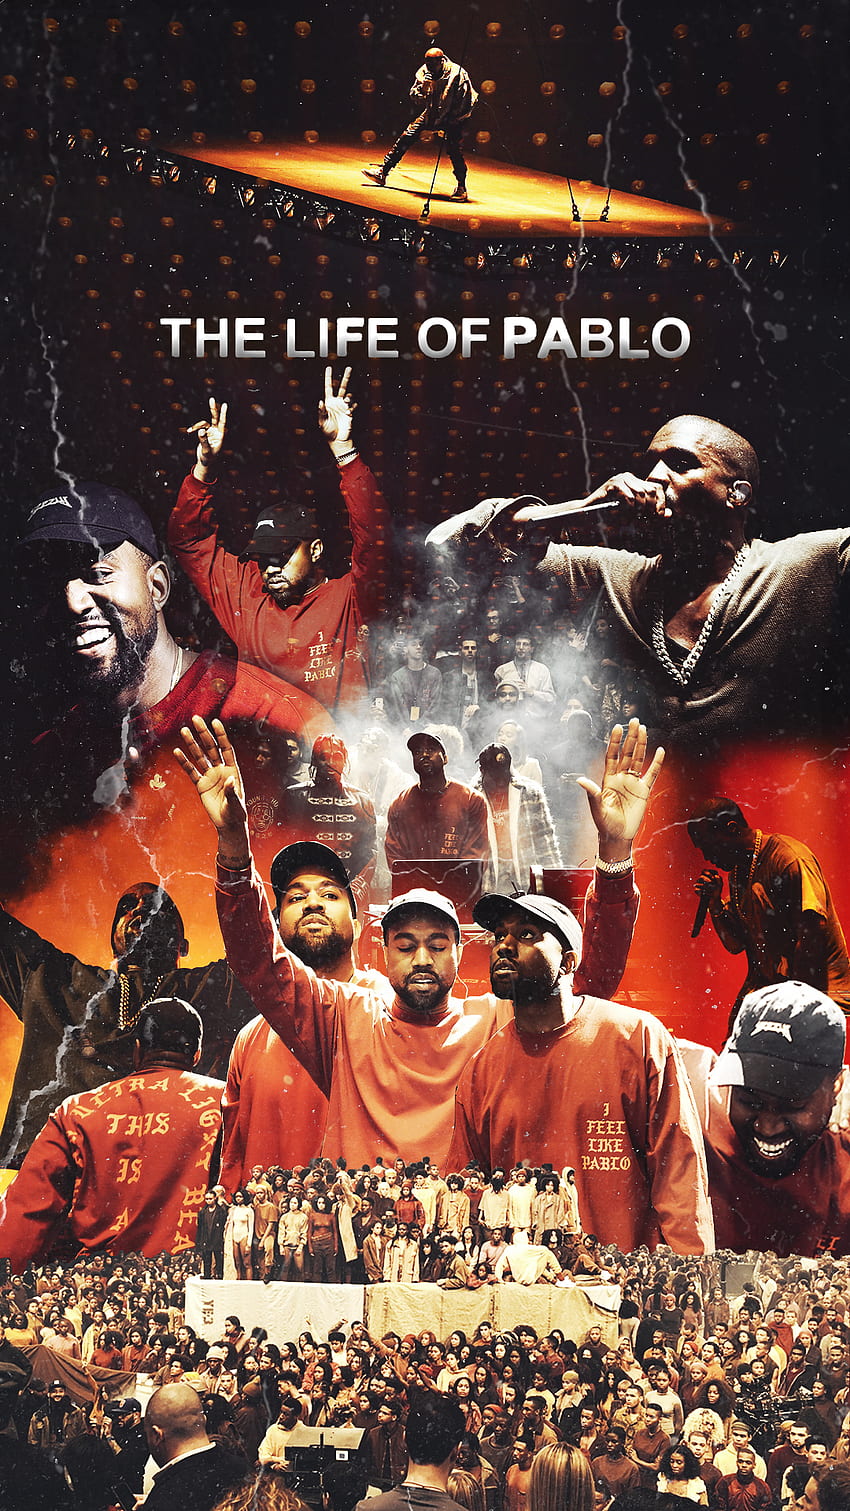 The Life of Pablo Aesthetic Kanye West Poster +!. Kanye west , Kanye west album cover, Rap album covers, Kanye West Saint Pablo HD phone wallpaper